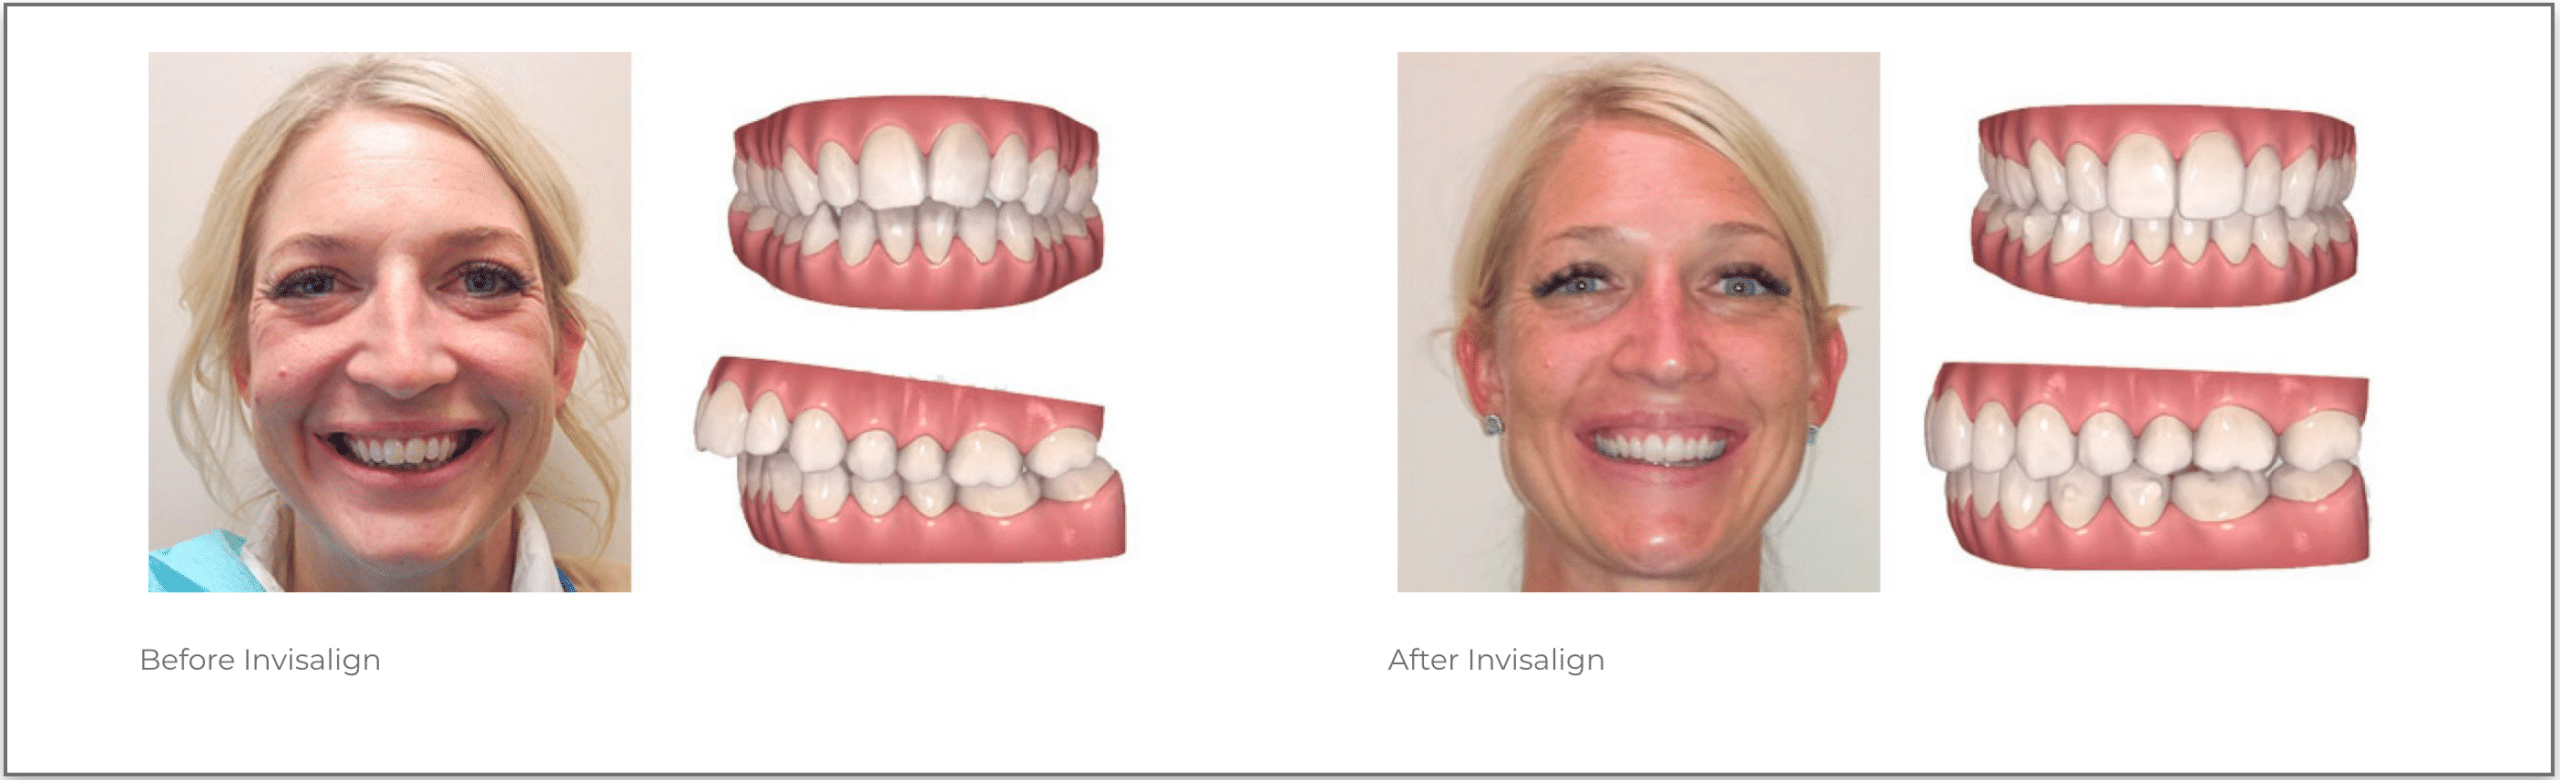 Invisalign; Invisible braces for the perfect smile. Finance Available